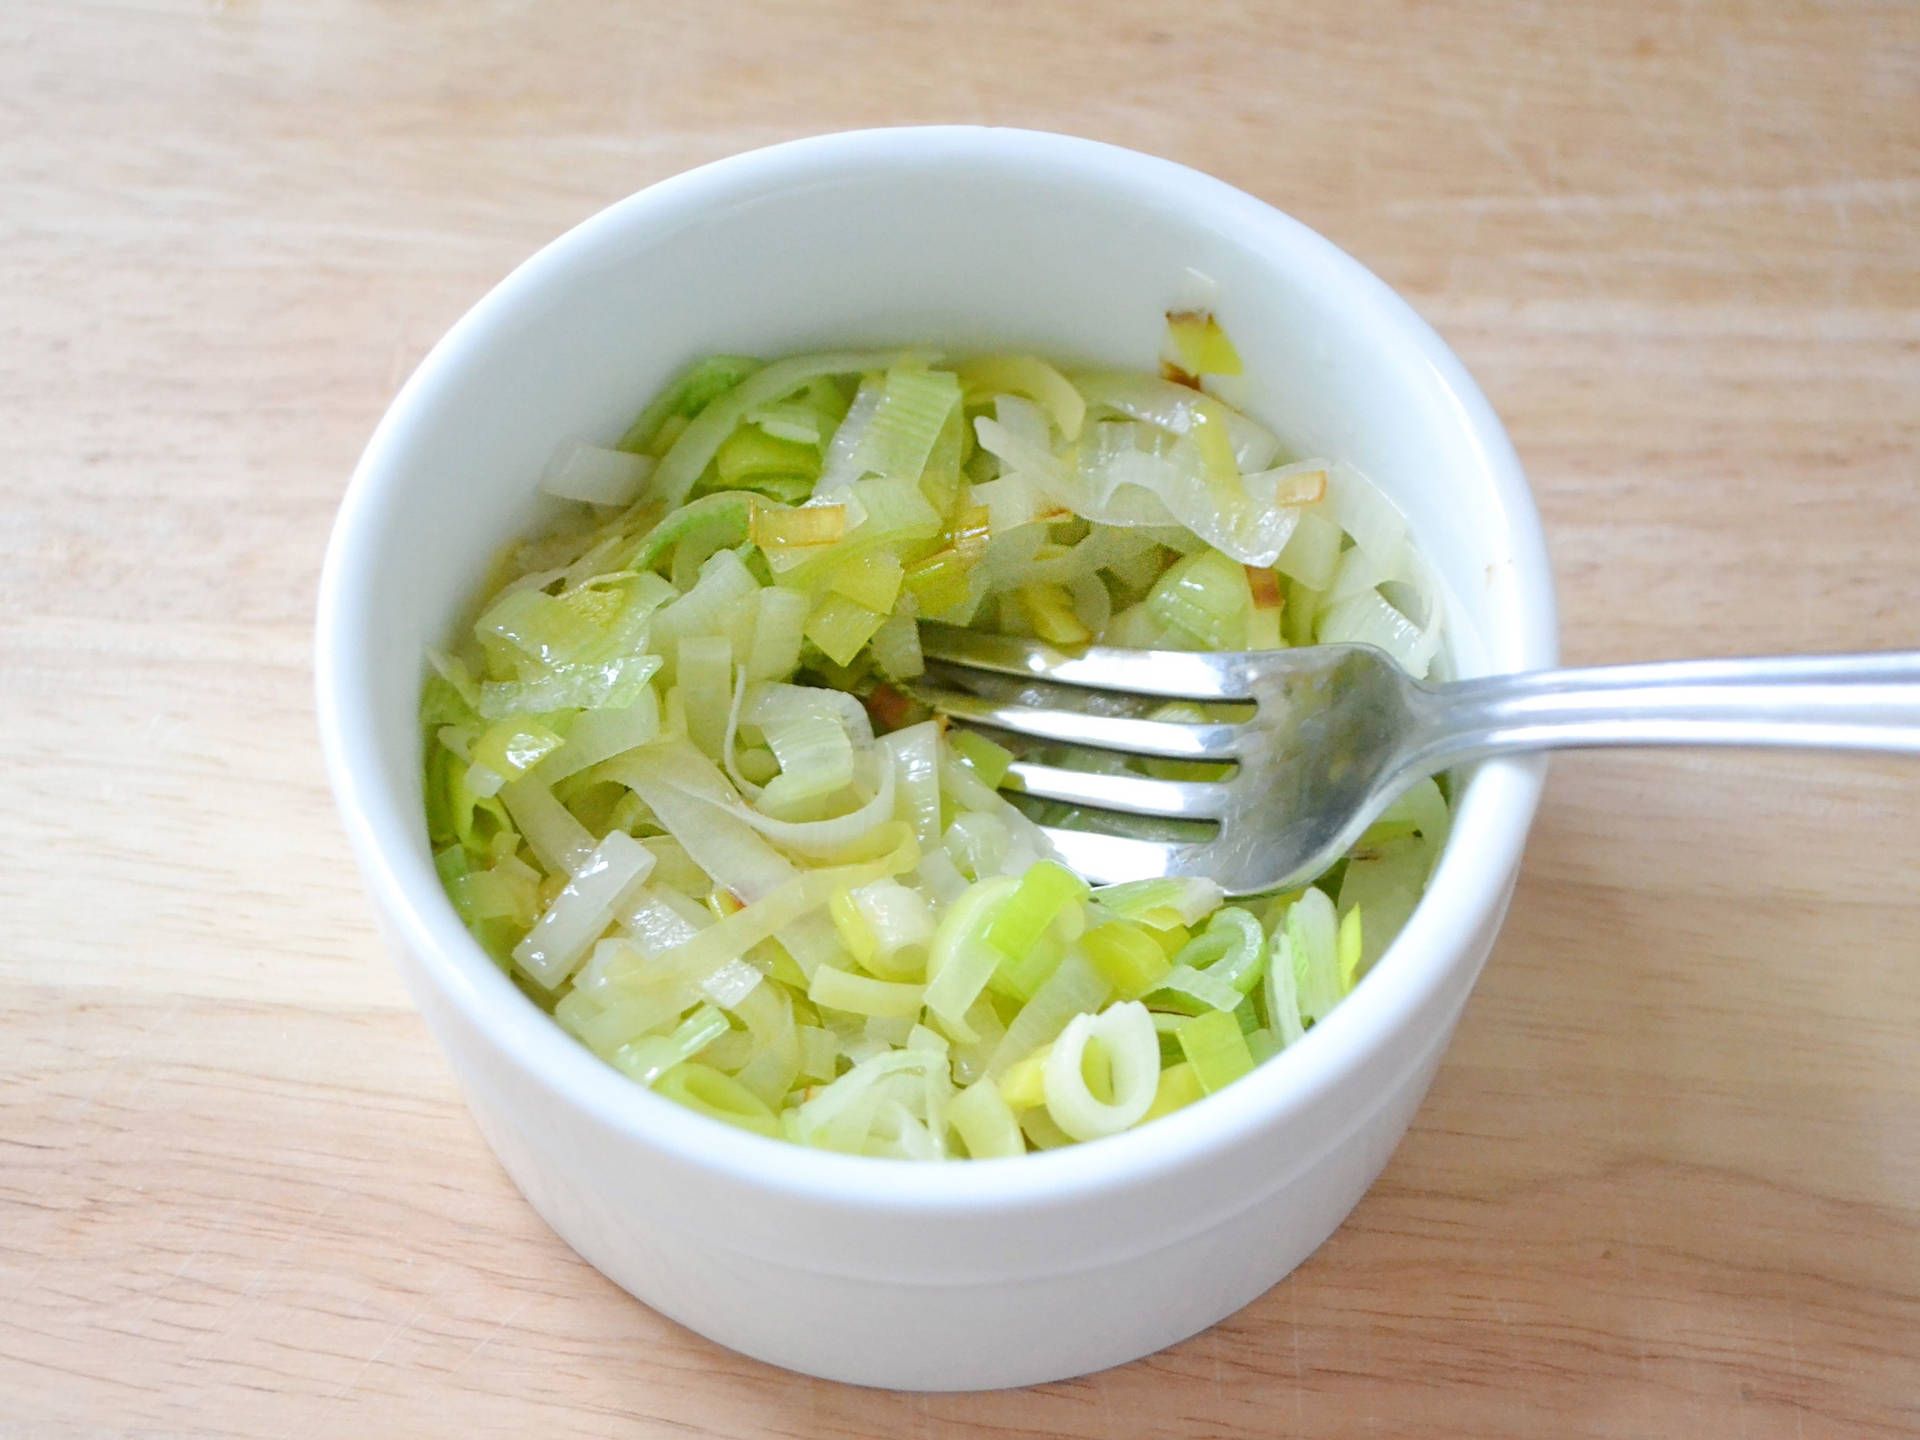 Chopped Leek Vegetables Into Tiny Thin Slices Wallpaper